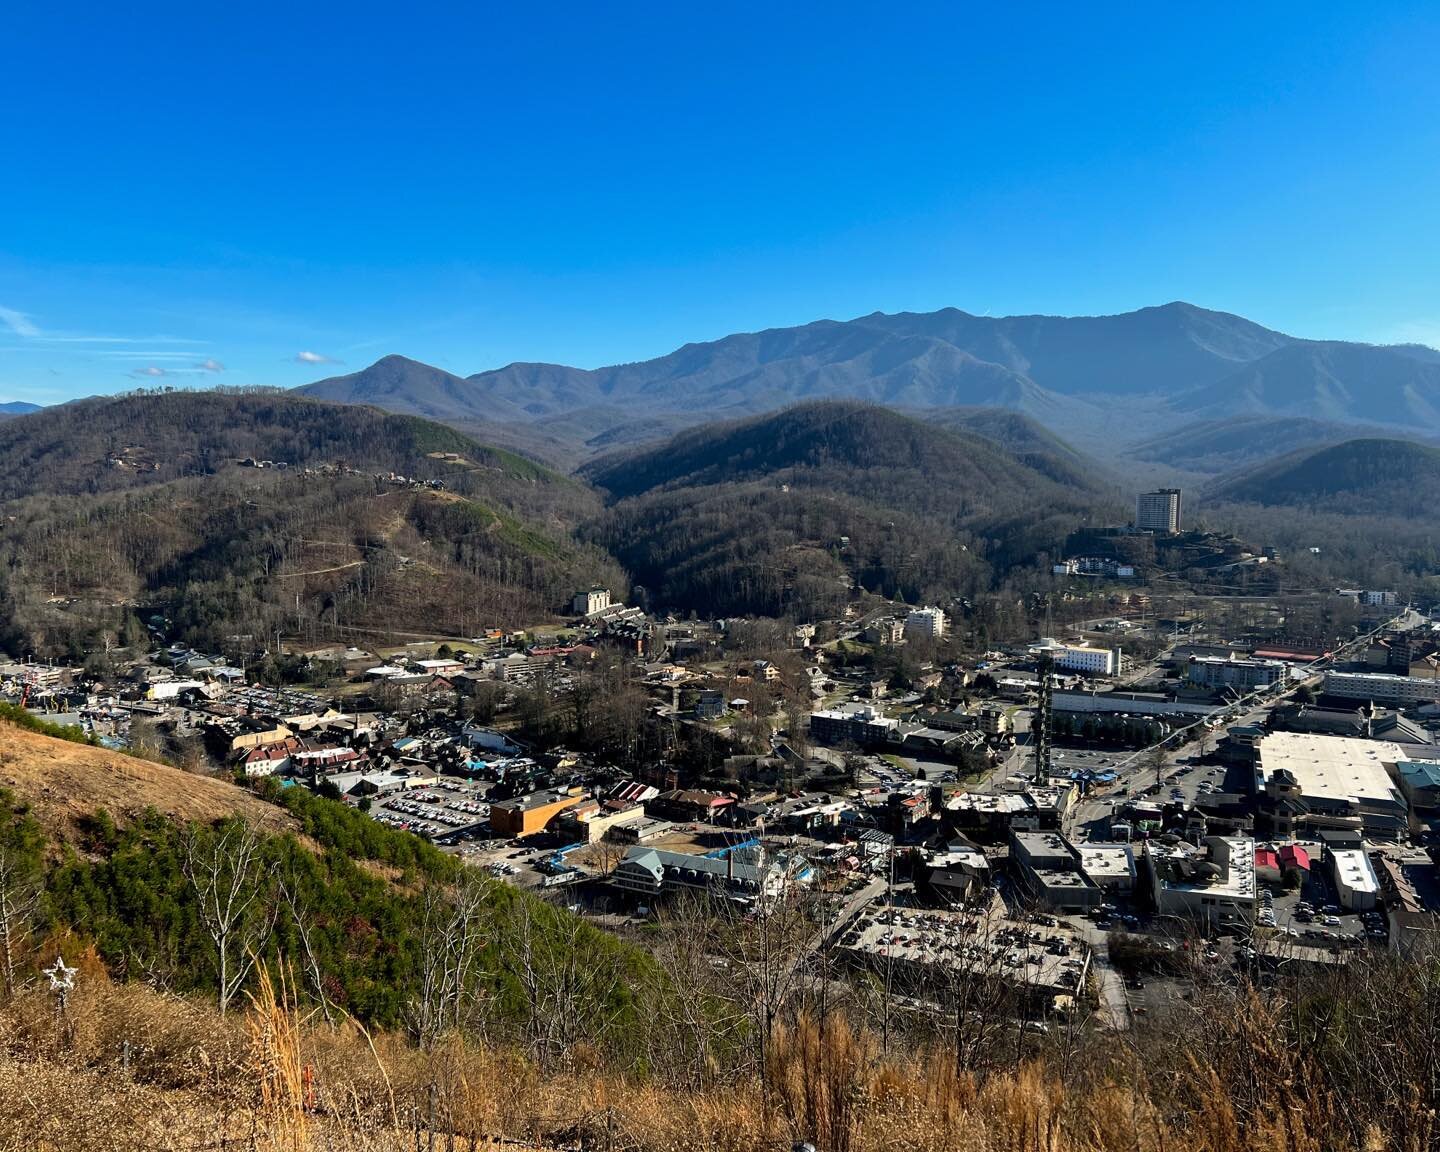 Here&rsquo;s a fun throwback to December 14th. A family trip to Gatlinburg. A gorgeous view from the lift on the way to the Skybridge. Now that was winter weather you could get used to!
.
.
.
.
.
#gatlinburg #gatlinburgtennessee #gatlinburgtn #gatlin